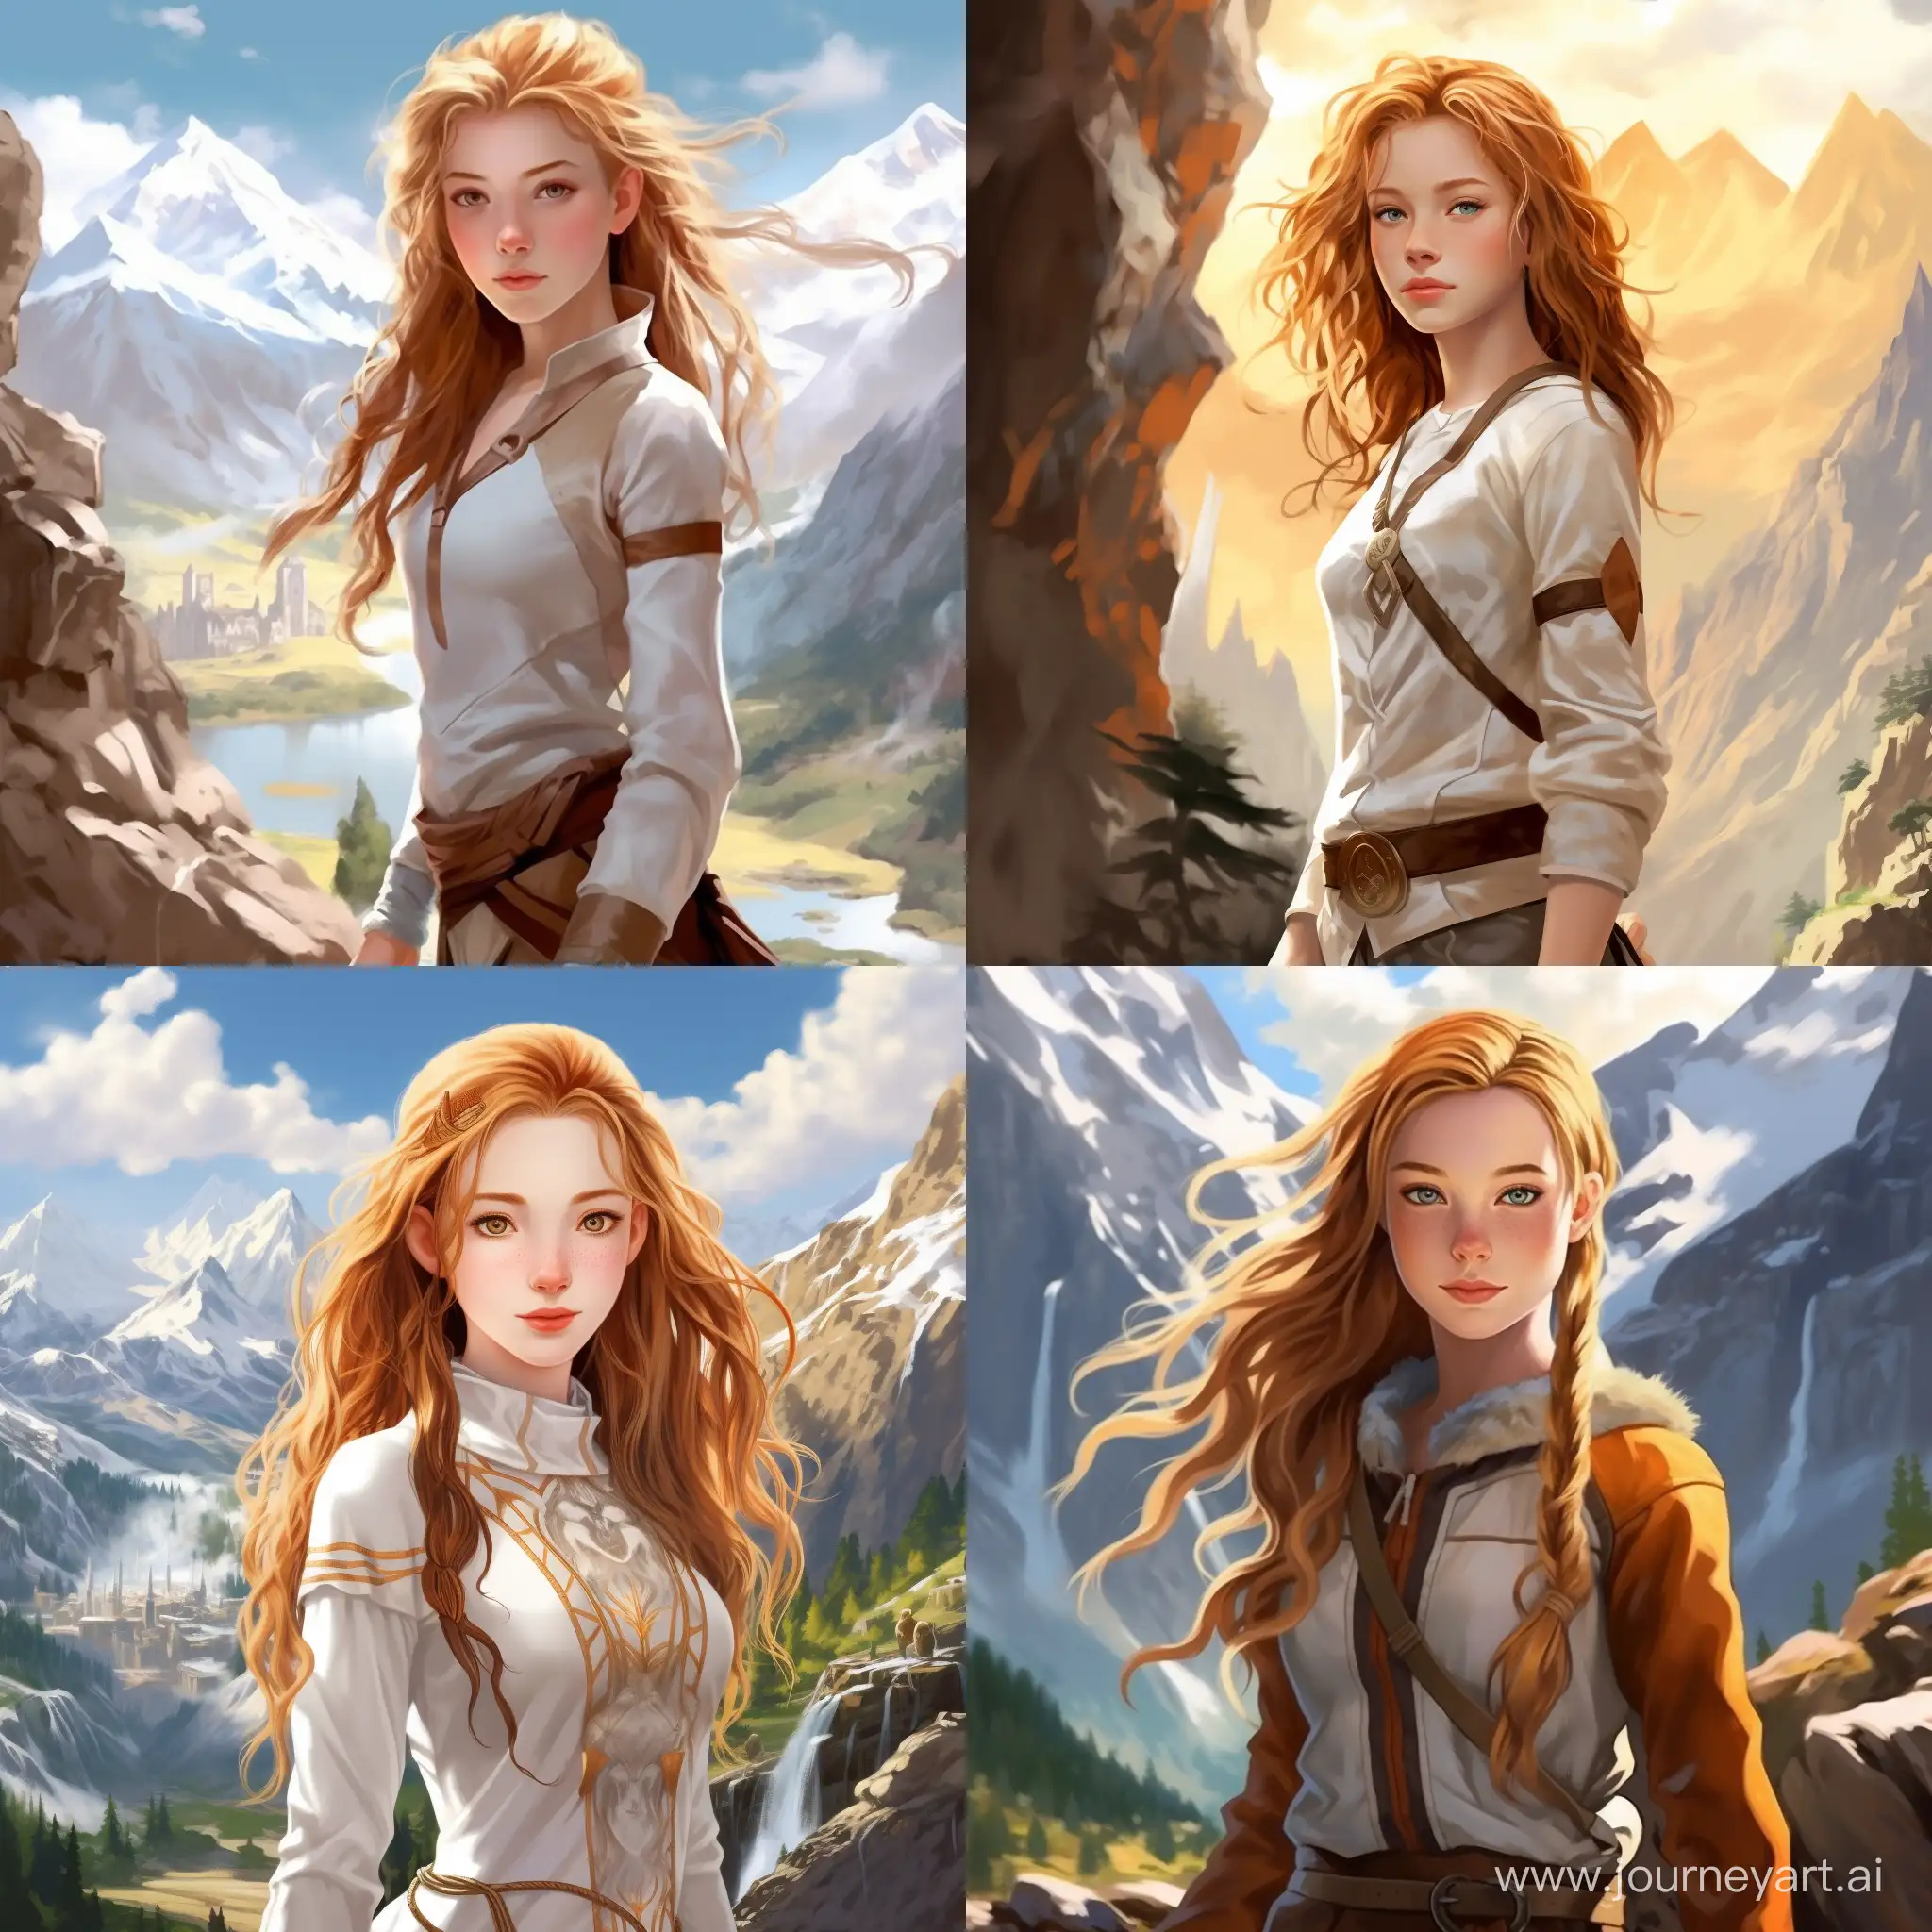 Beautiful girl, golden hair, gray-blue eyes, snow-white skin, teenager, 14 years old, avatar style legend of aang, journey in the mountains, high quality, high detail, cartoon art